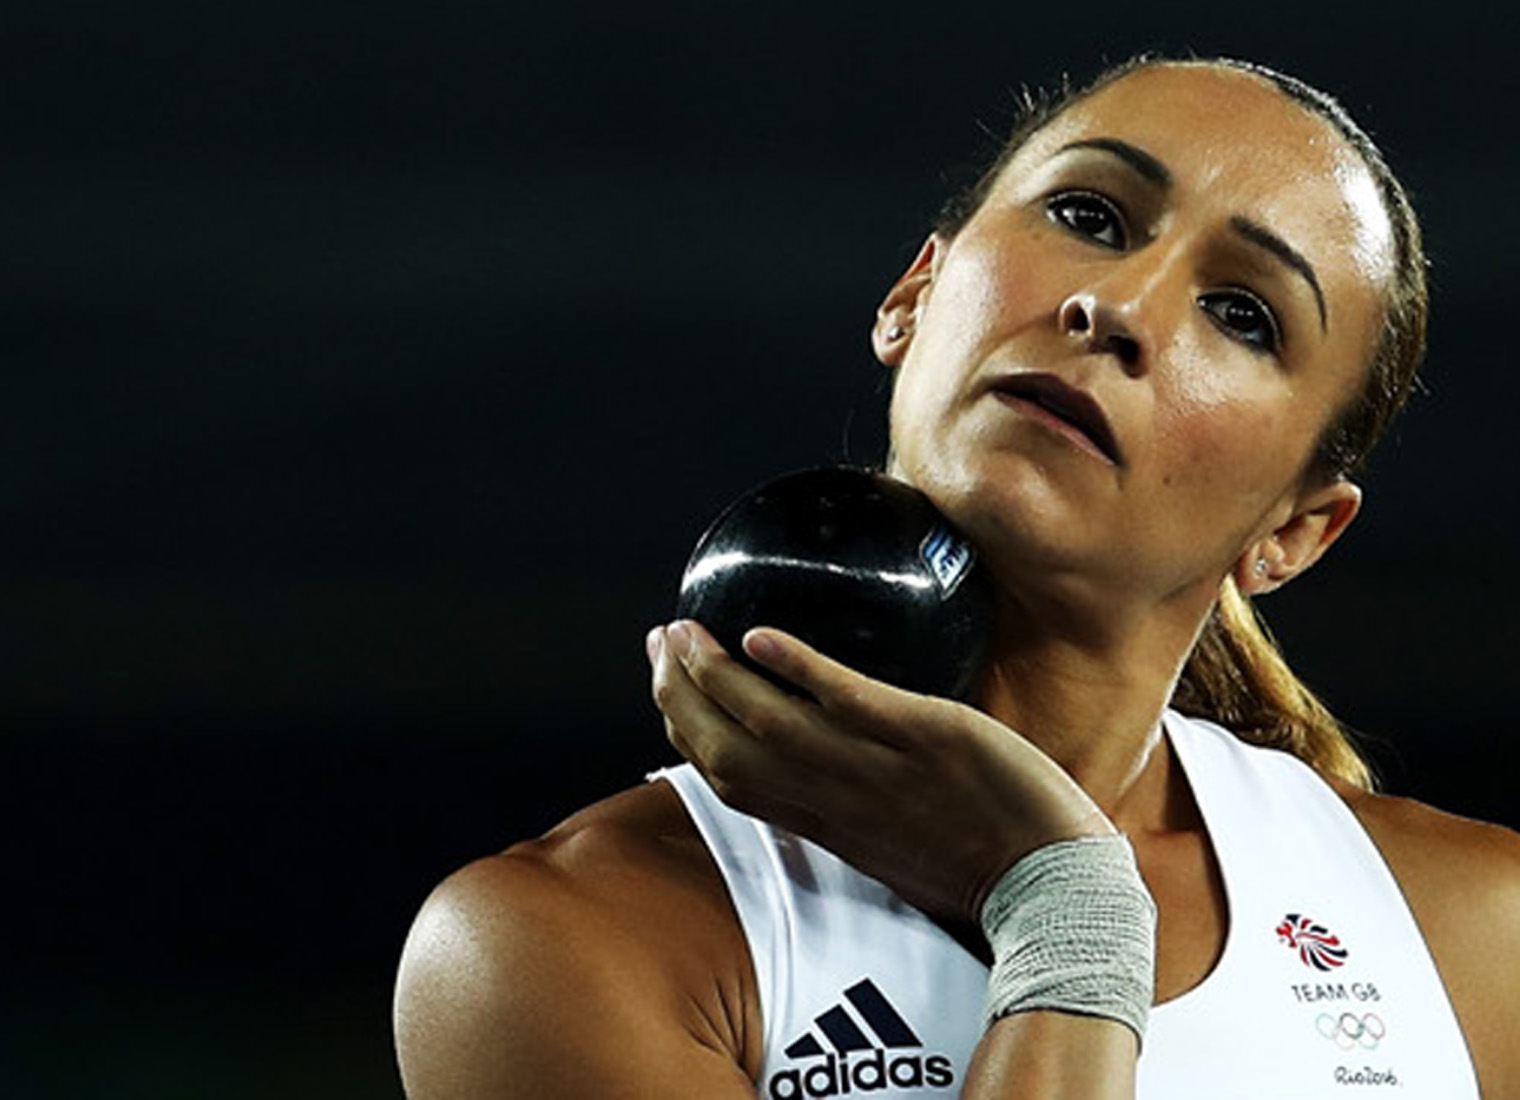 RIO DE JANEIRO, BRAZIL - AUGUST 12: Jessica Ennis-Hill of Great Britain during the Women's Heptathlon Shot Put Qualifying Round - Group B on Day 7 of the Rio 2016 Olympic Games at the Olympic Stadium on August 12, 2016 in Rio de Janeiro, Brazil. (Photo by Cameron Spencer/Getty Images)